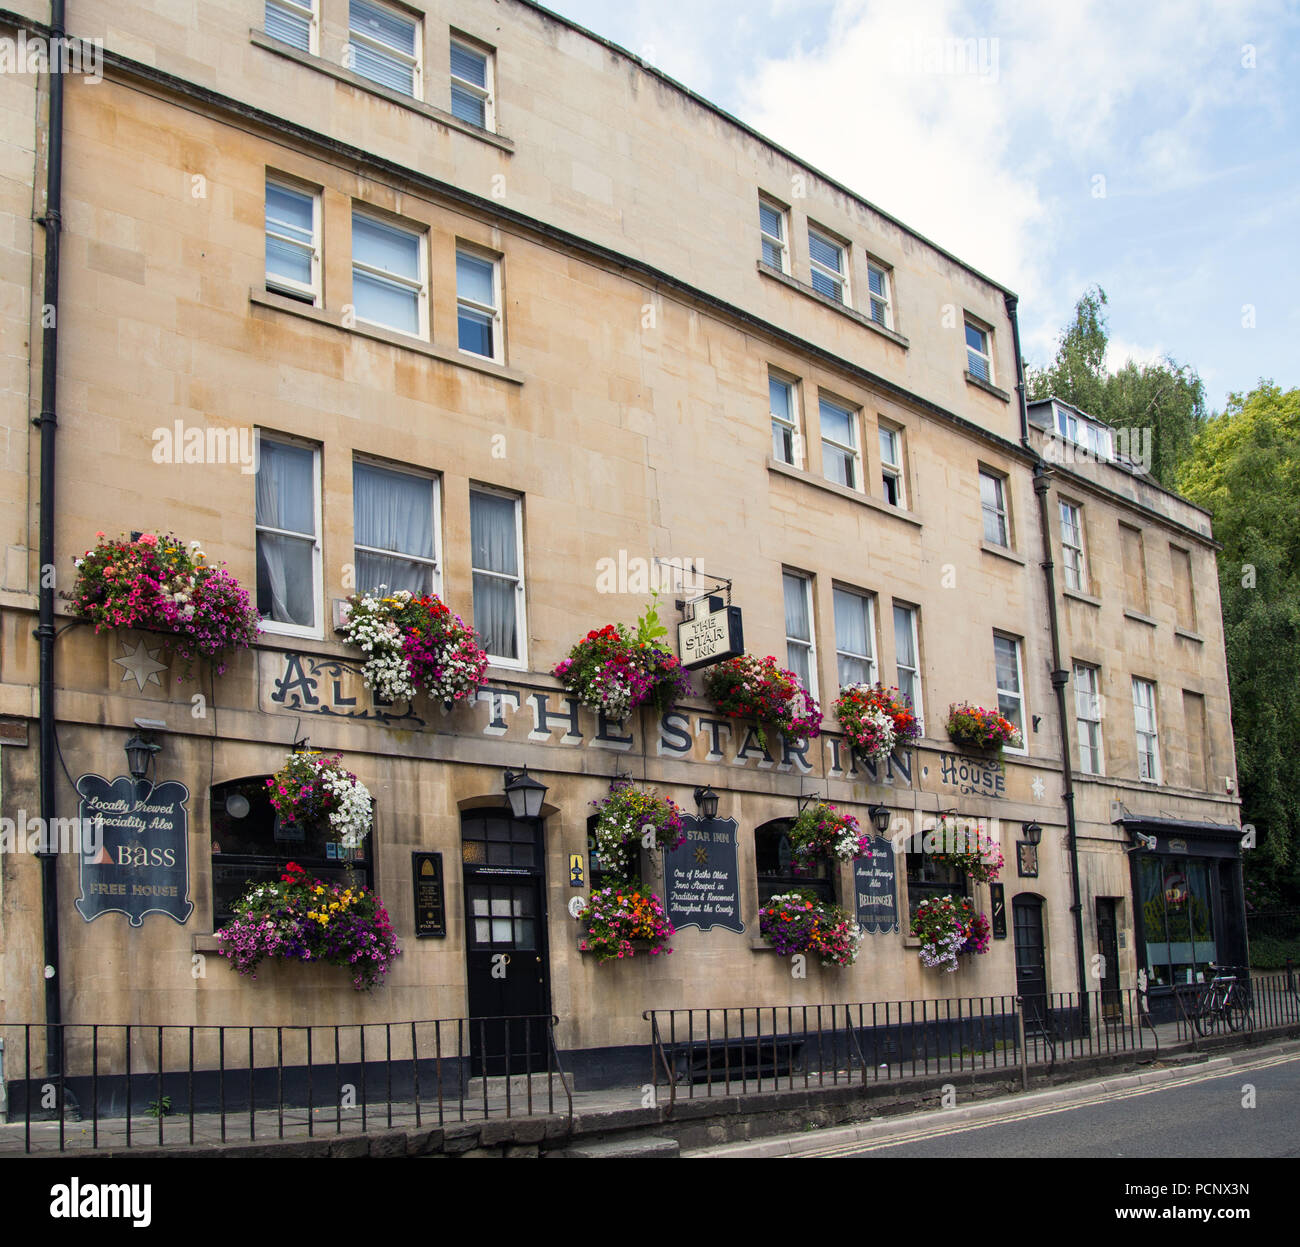 Hanging baskets on the facade of the 18th century Star Inn Ale House, Bath. Stock Photo